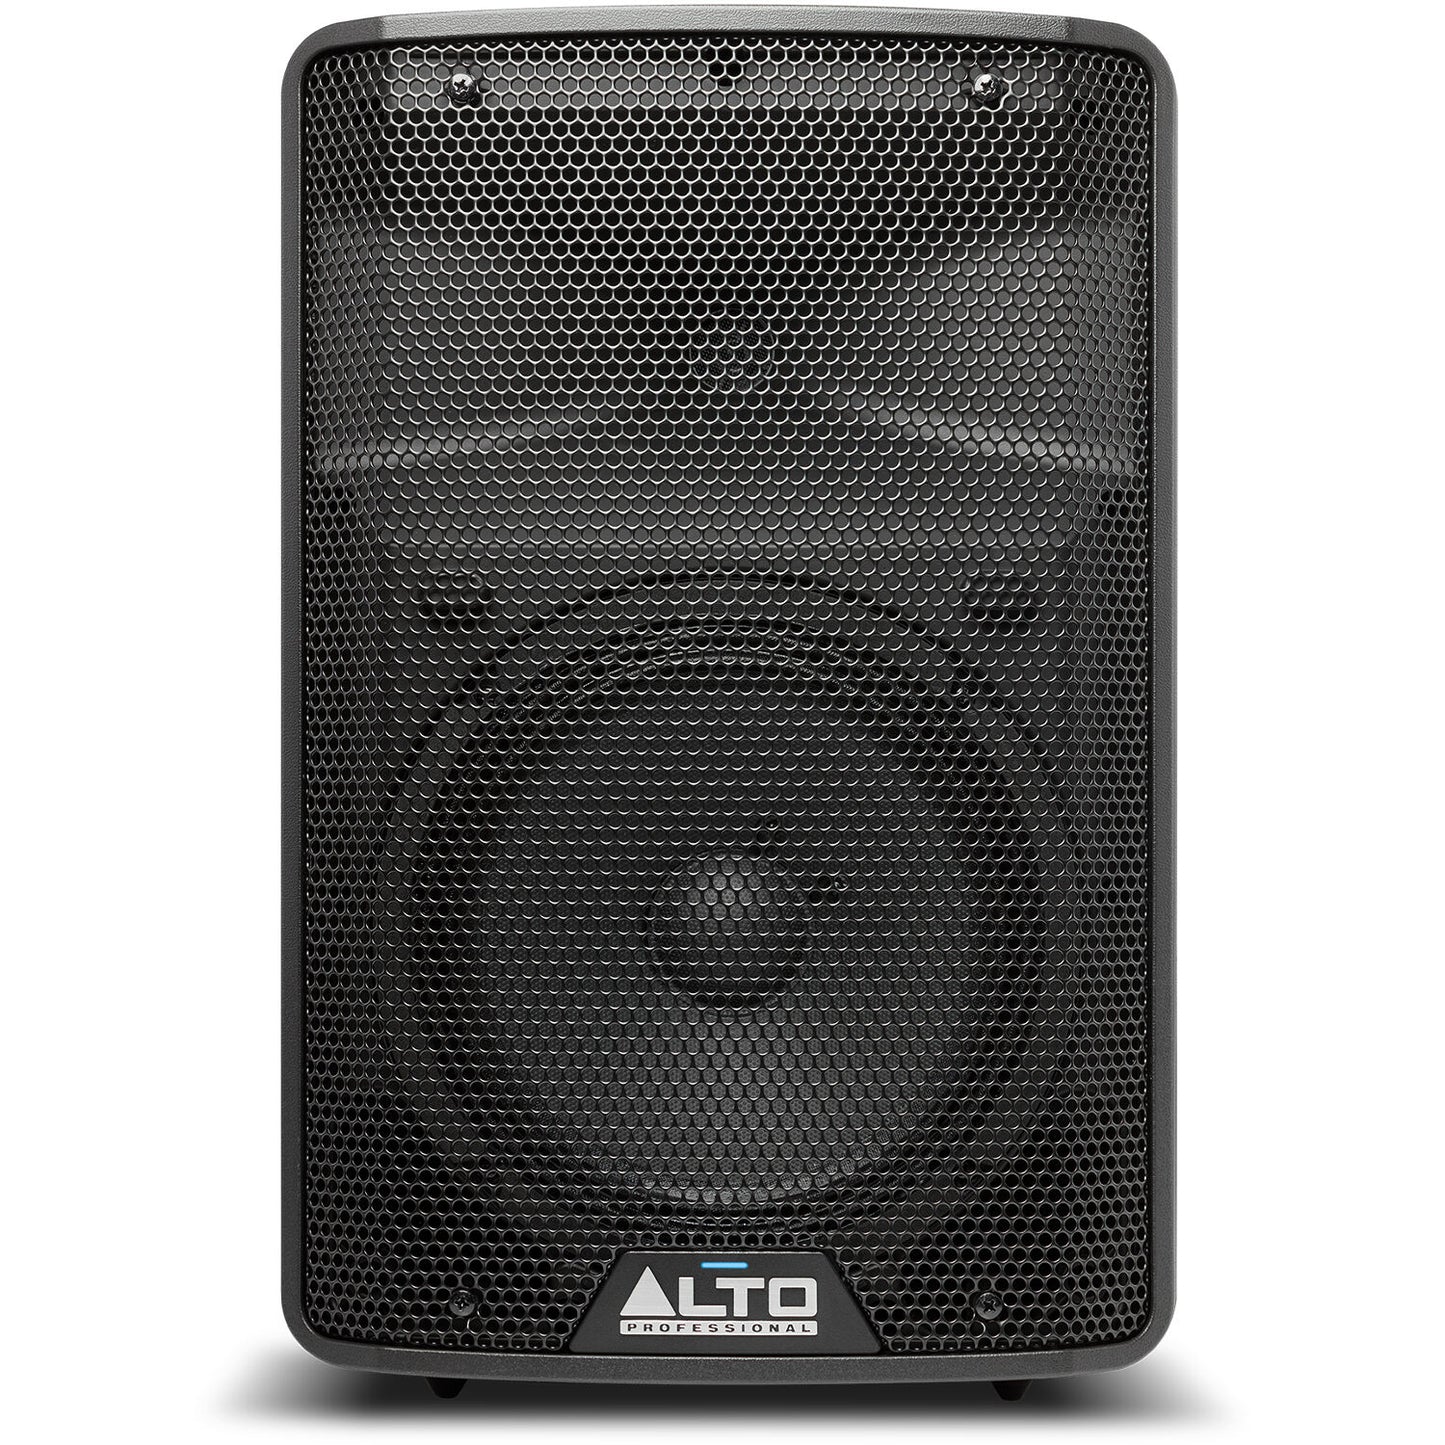 Alto Professional TX308 2-Way Active Ported 350W Powered Loudspeaker Lightweight with 8in Woofer LF Driver Overload Protection